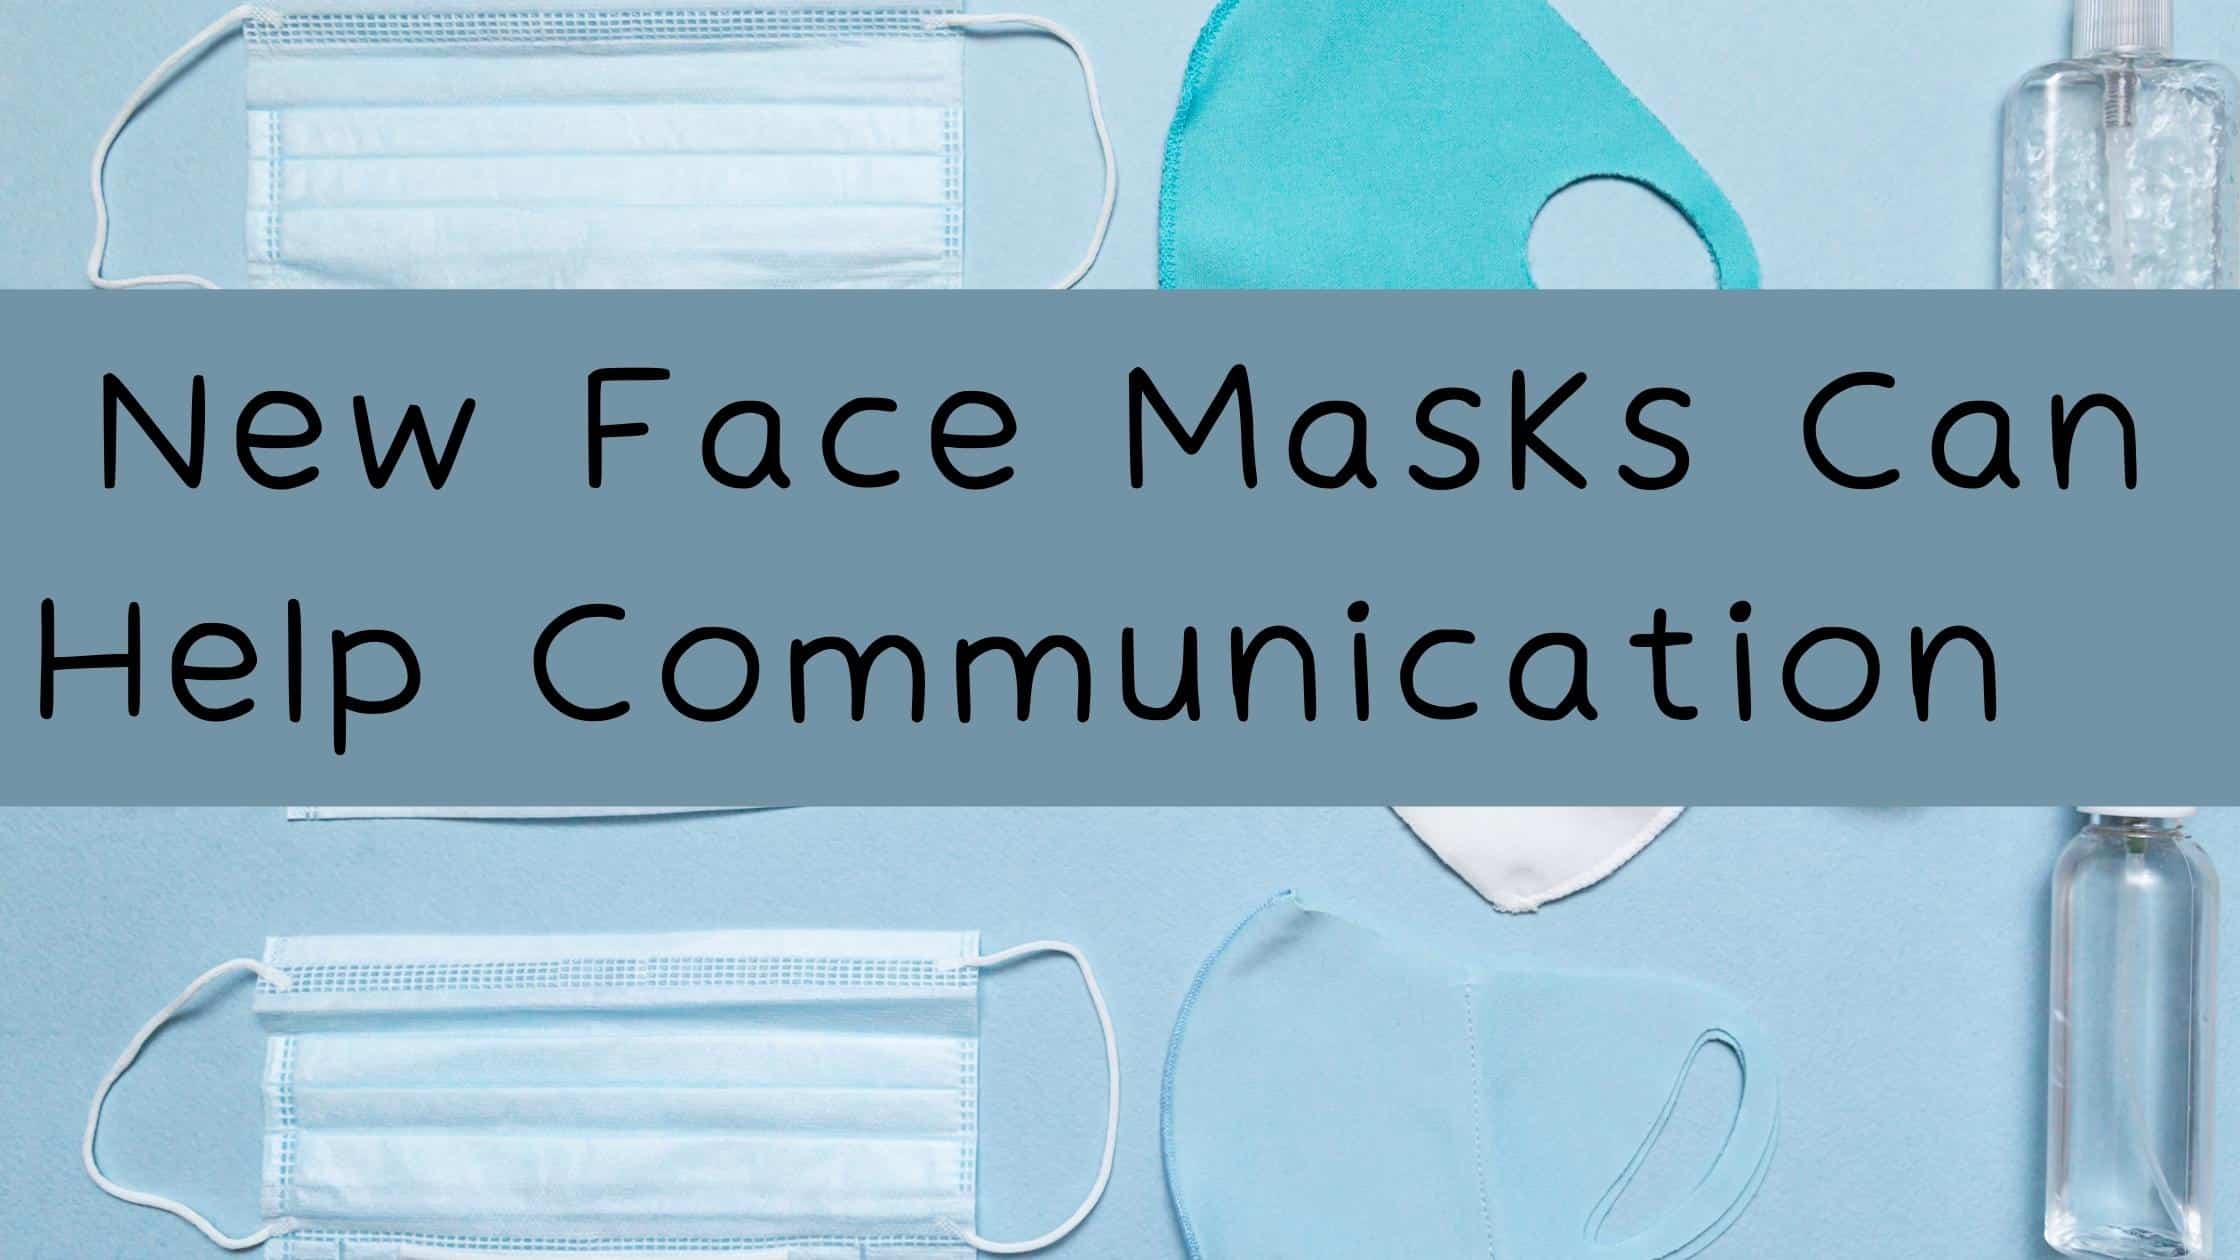 New Face Masks Can Help Communication